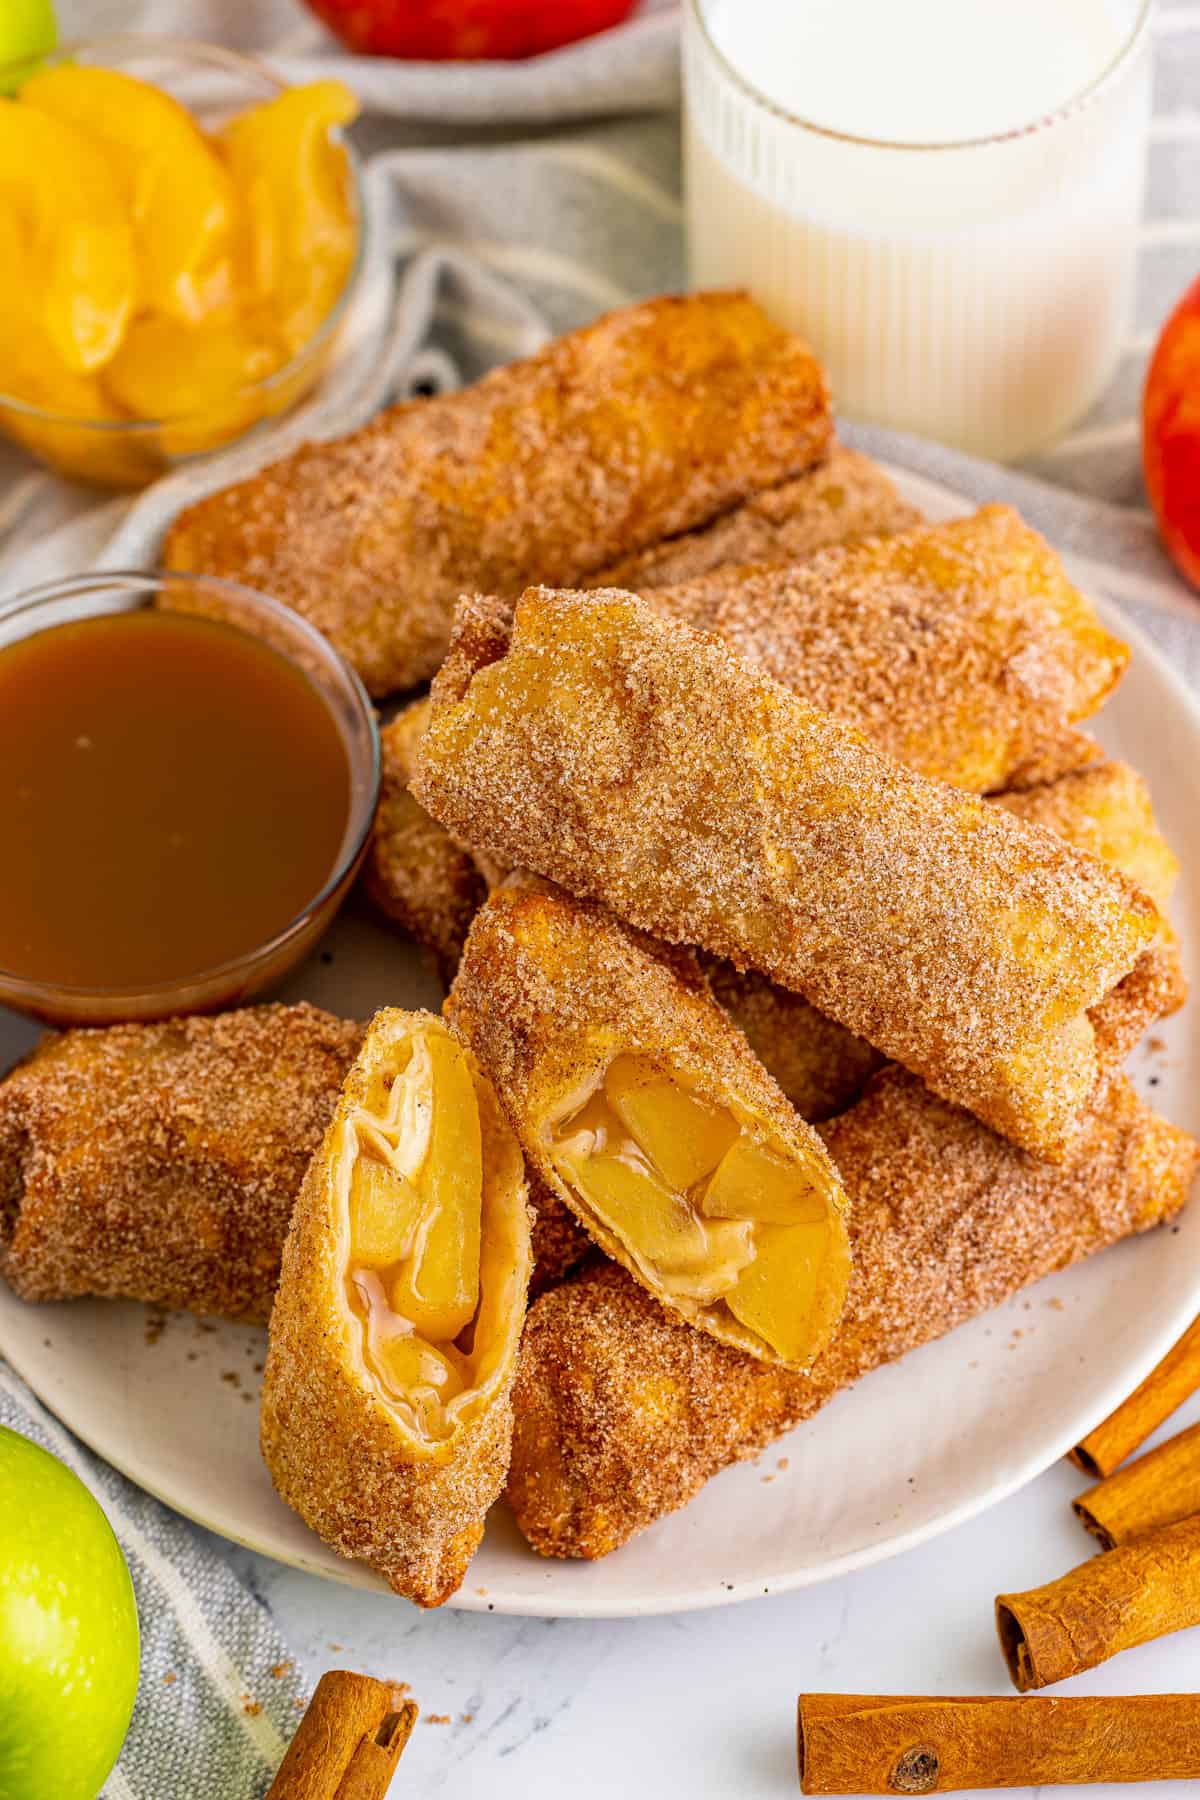 Apple pie egg roll with a bowl of caramel sauce on a plate. One apple egg roll is cut in half to show apple pie filling inside.